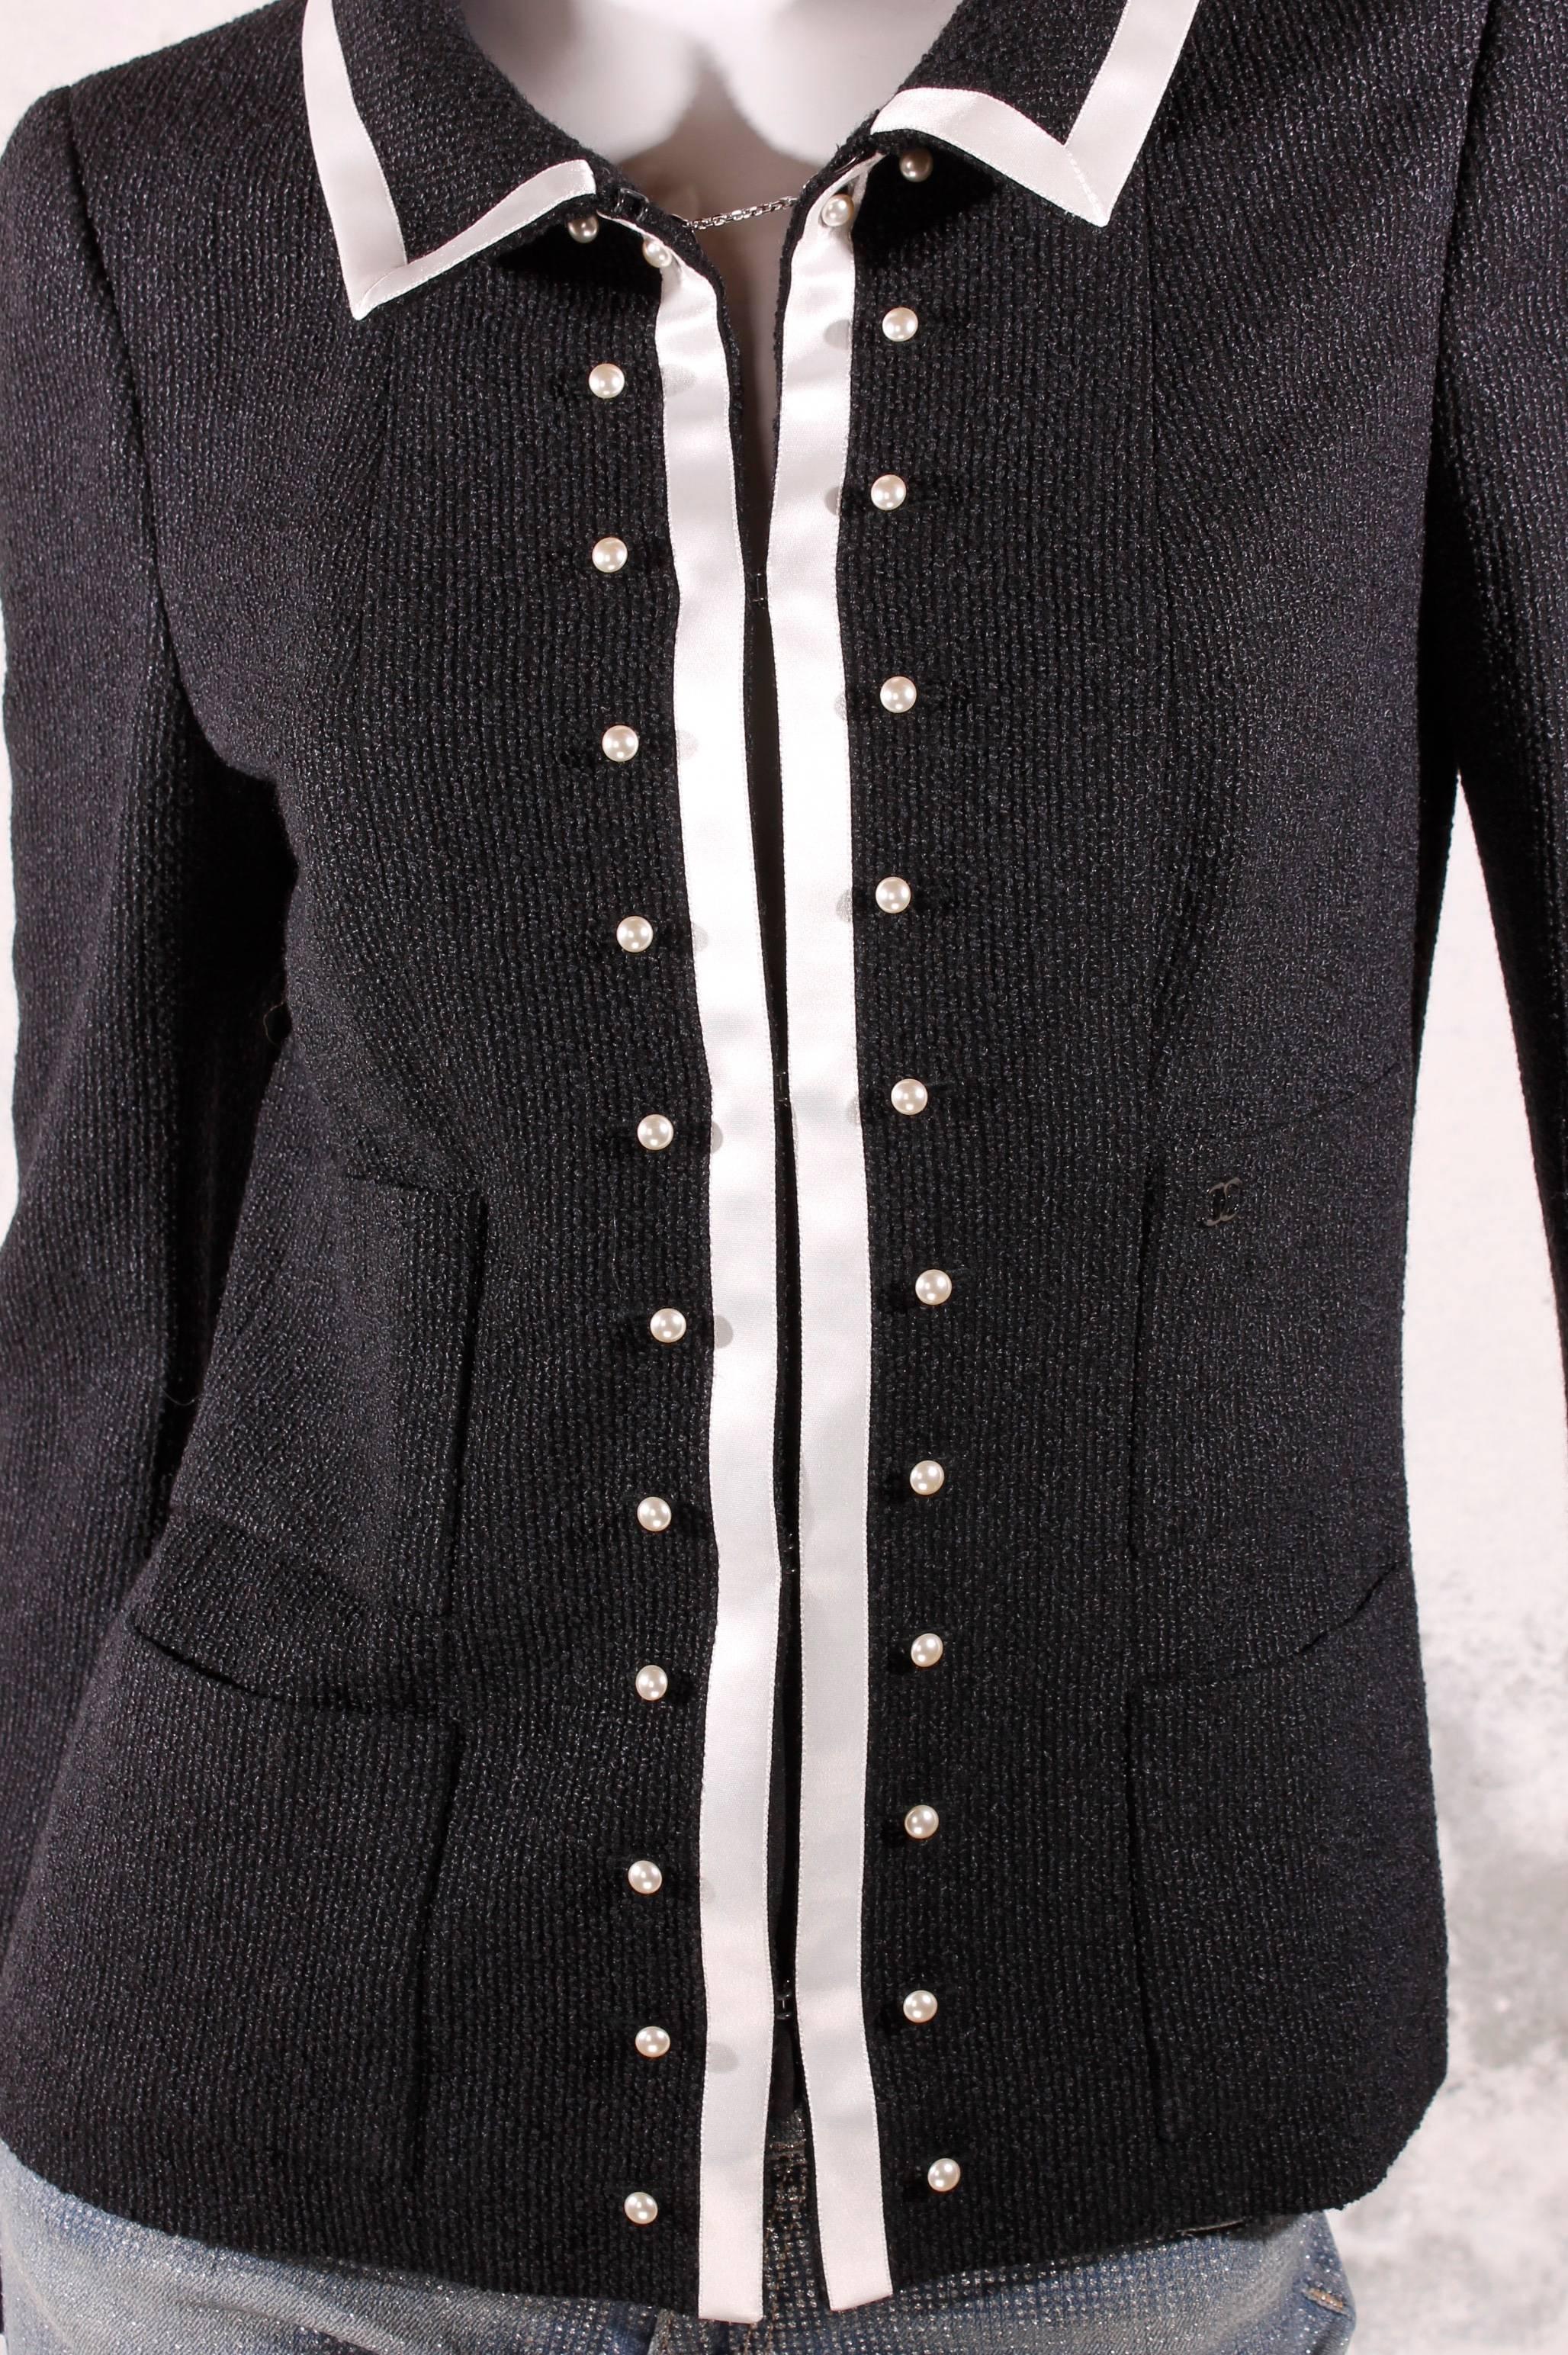 Chanel Jacket and Skirt - Black & White For Sale 3